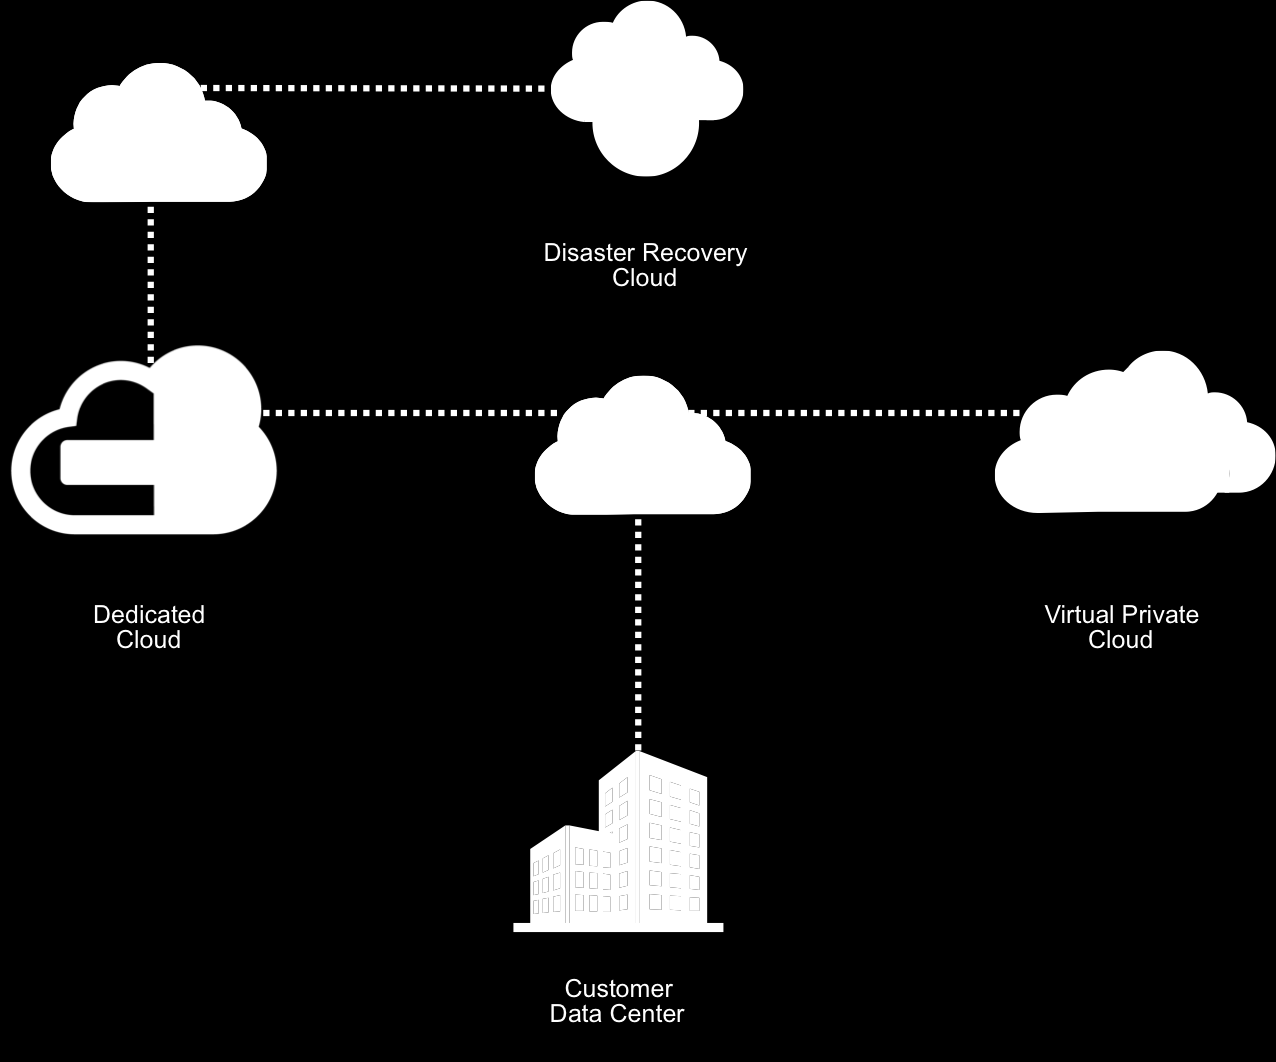 Figure 2. Building out a hybrid cloud infrastructure is akin to building another data center one that is virtual, but another data center nonetheless.